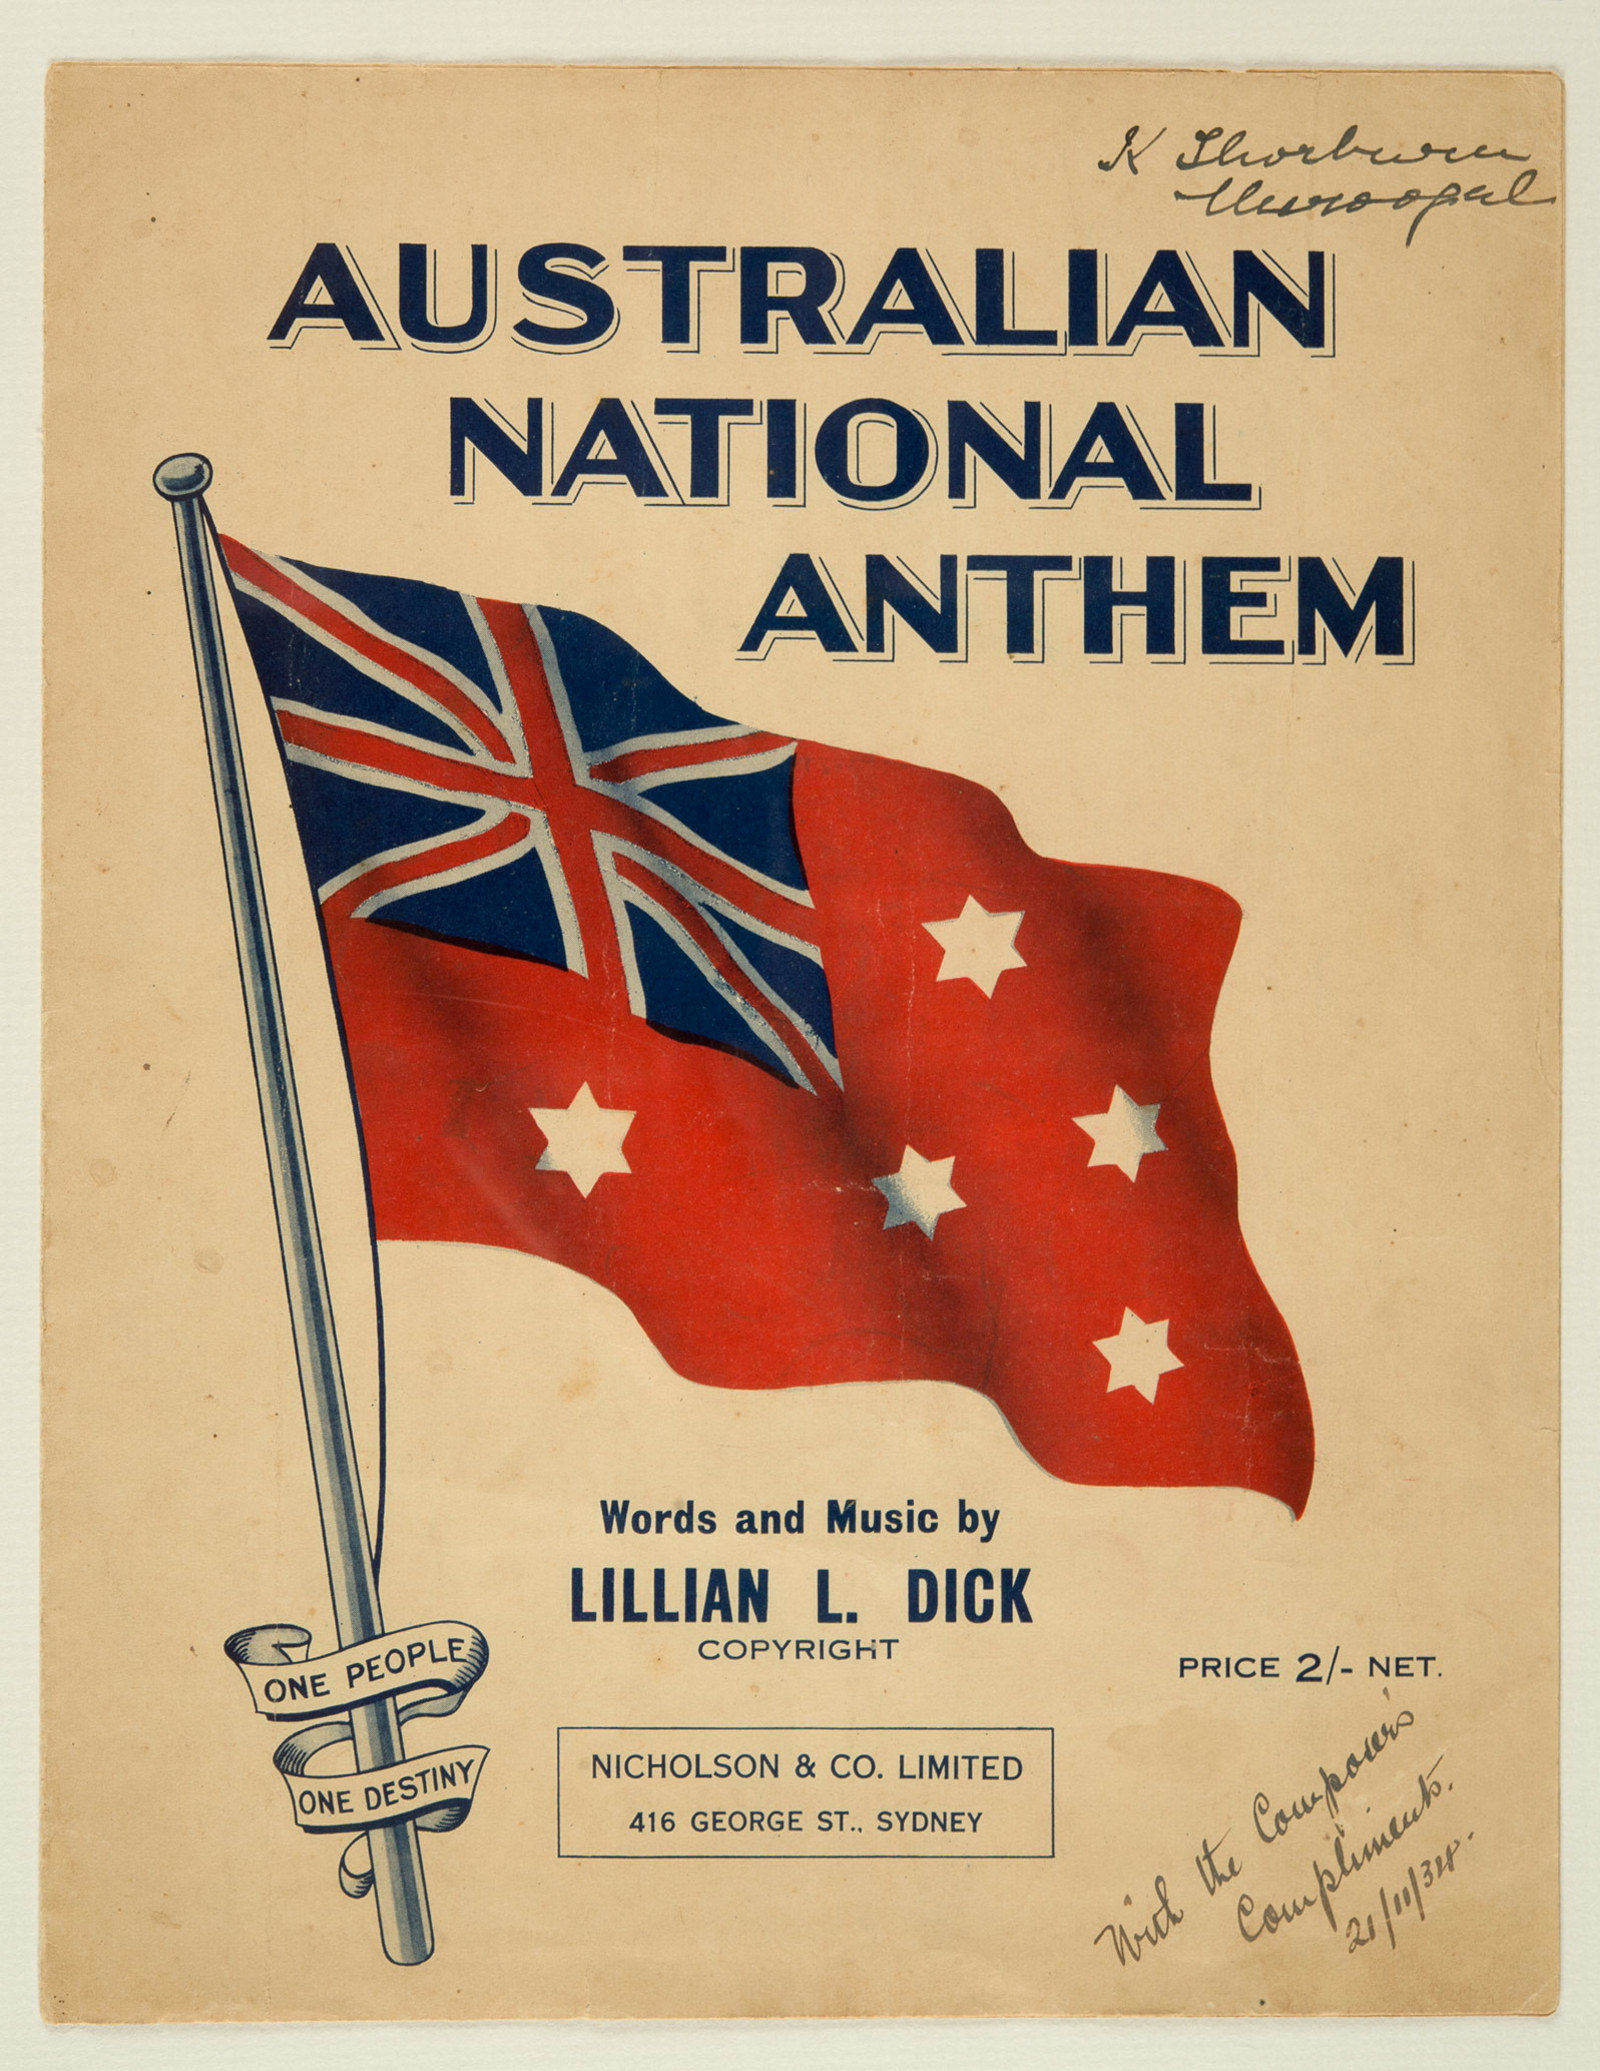 Front cover of sheet music,' Australian National Anthem', words and music by Lillian L. Dick, published 1934